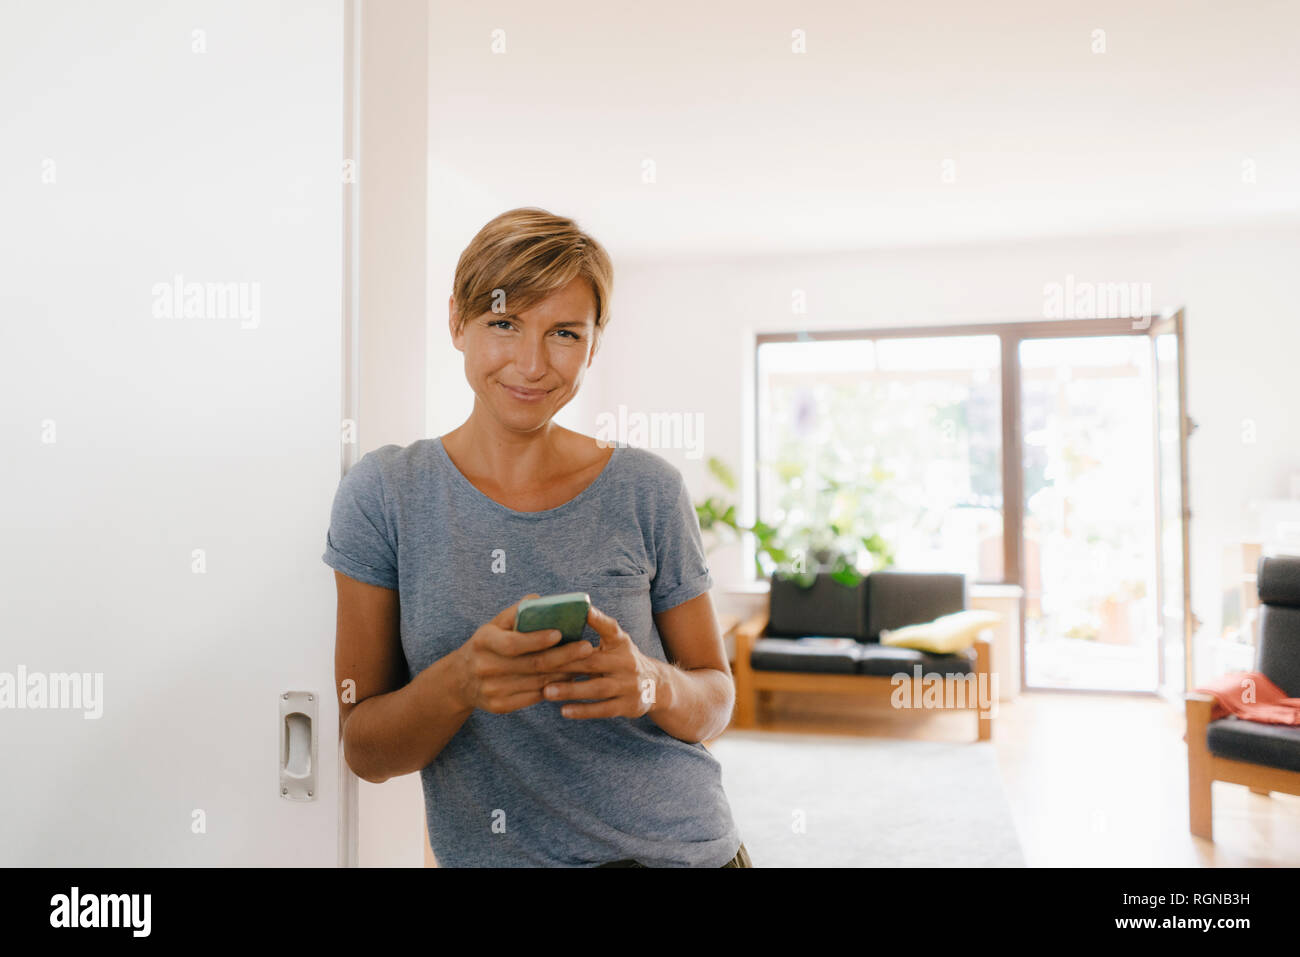 Portrait of smiling woman at home holding cell phone Stock Photo